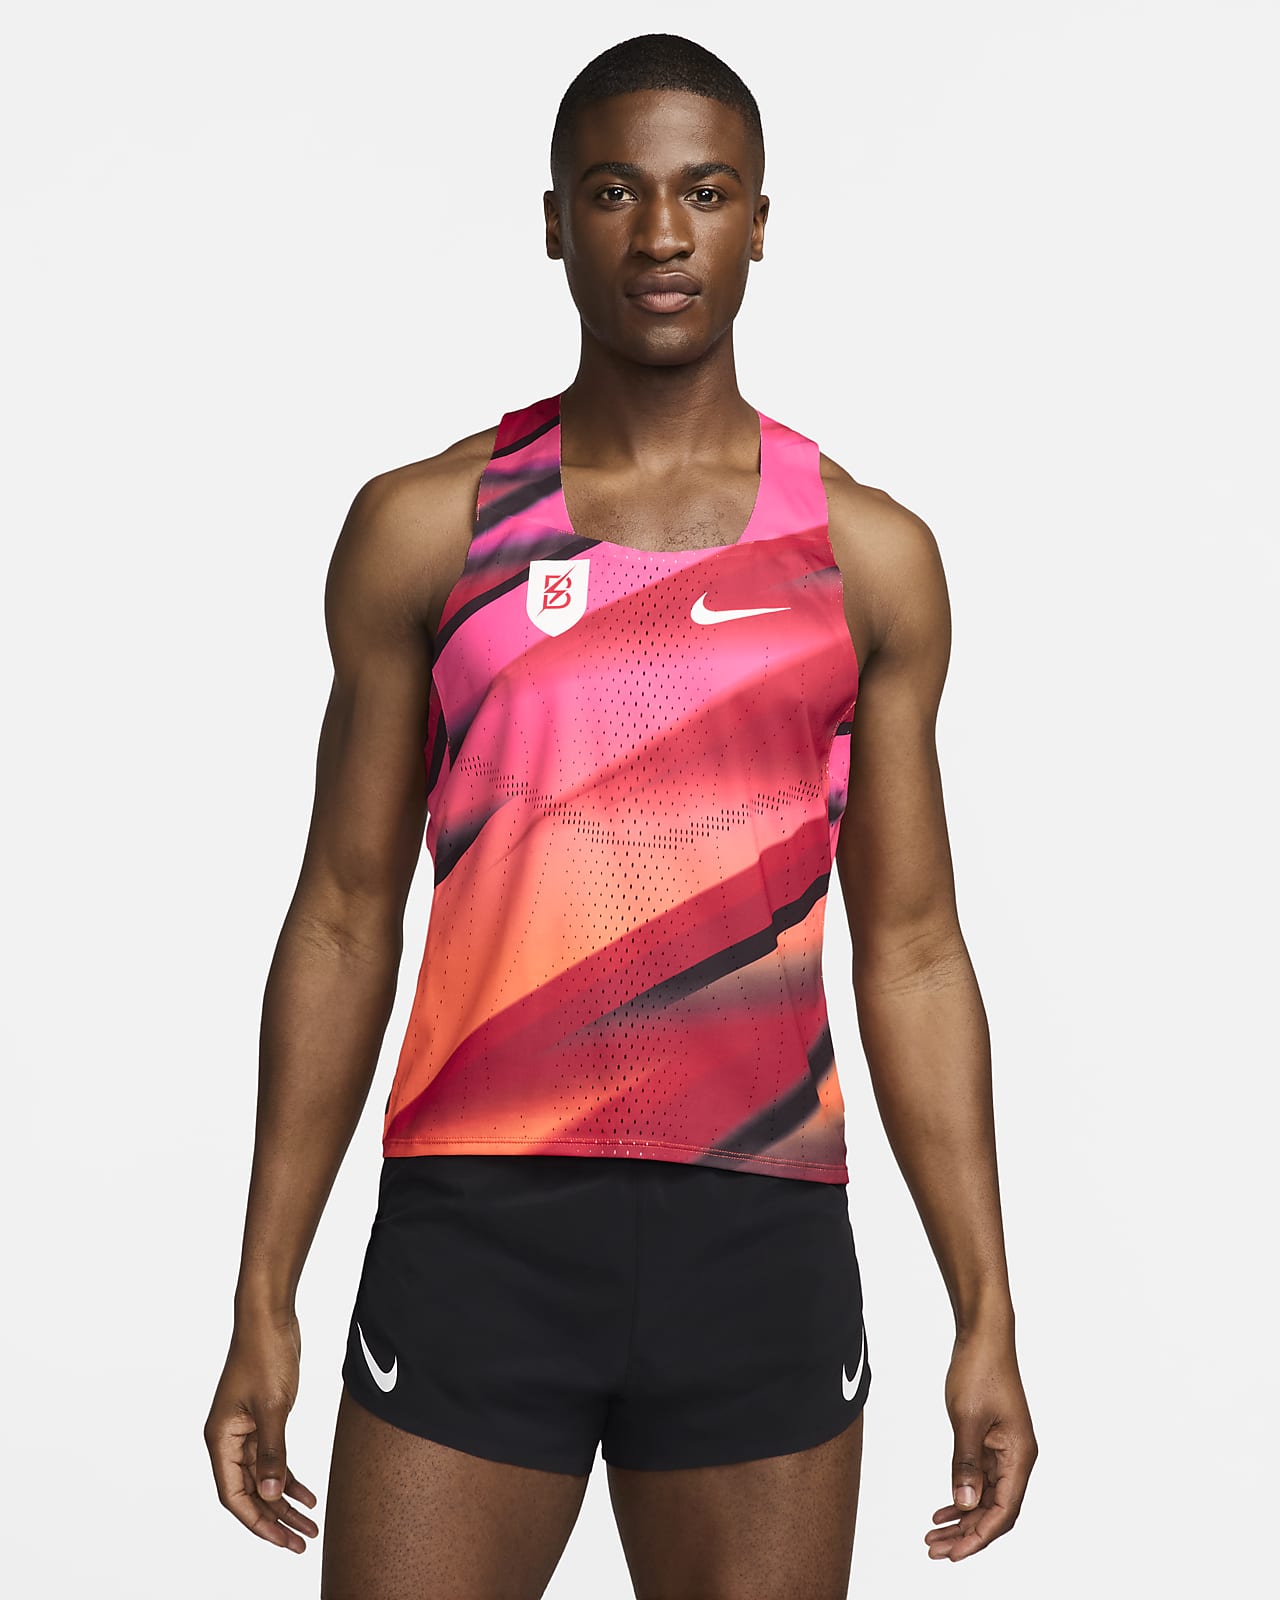 Maillot de running Nike AeroSwift Bowerman Track Club pour homme